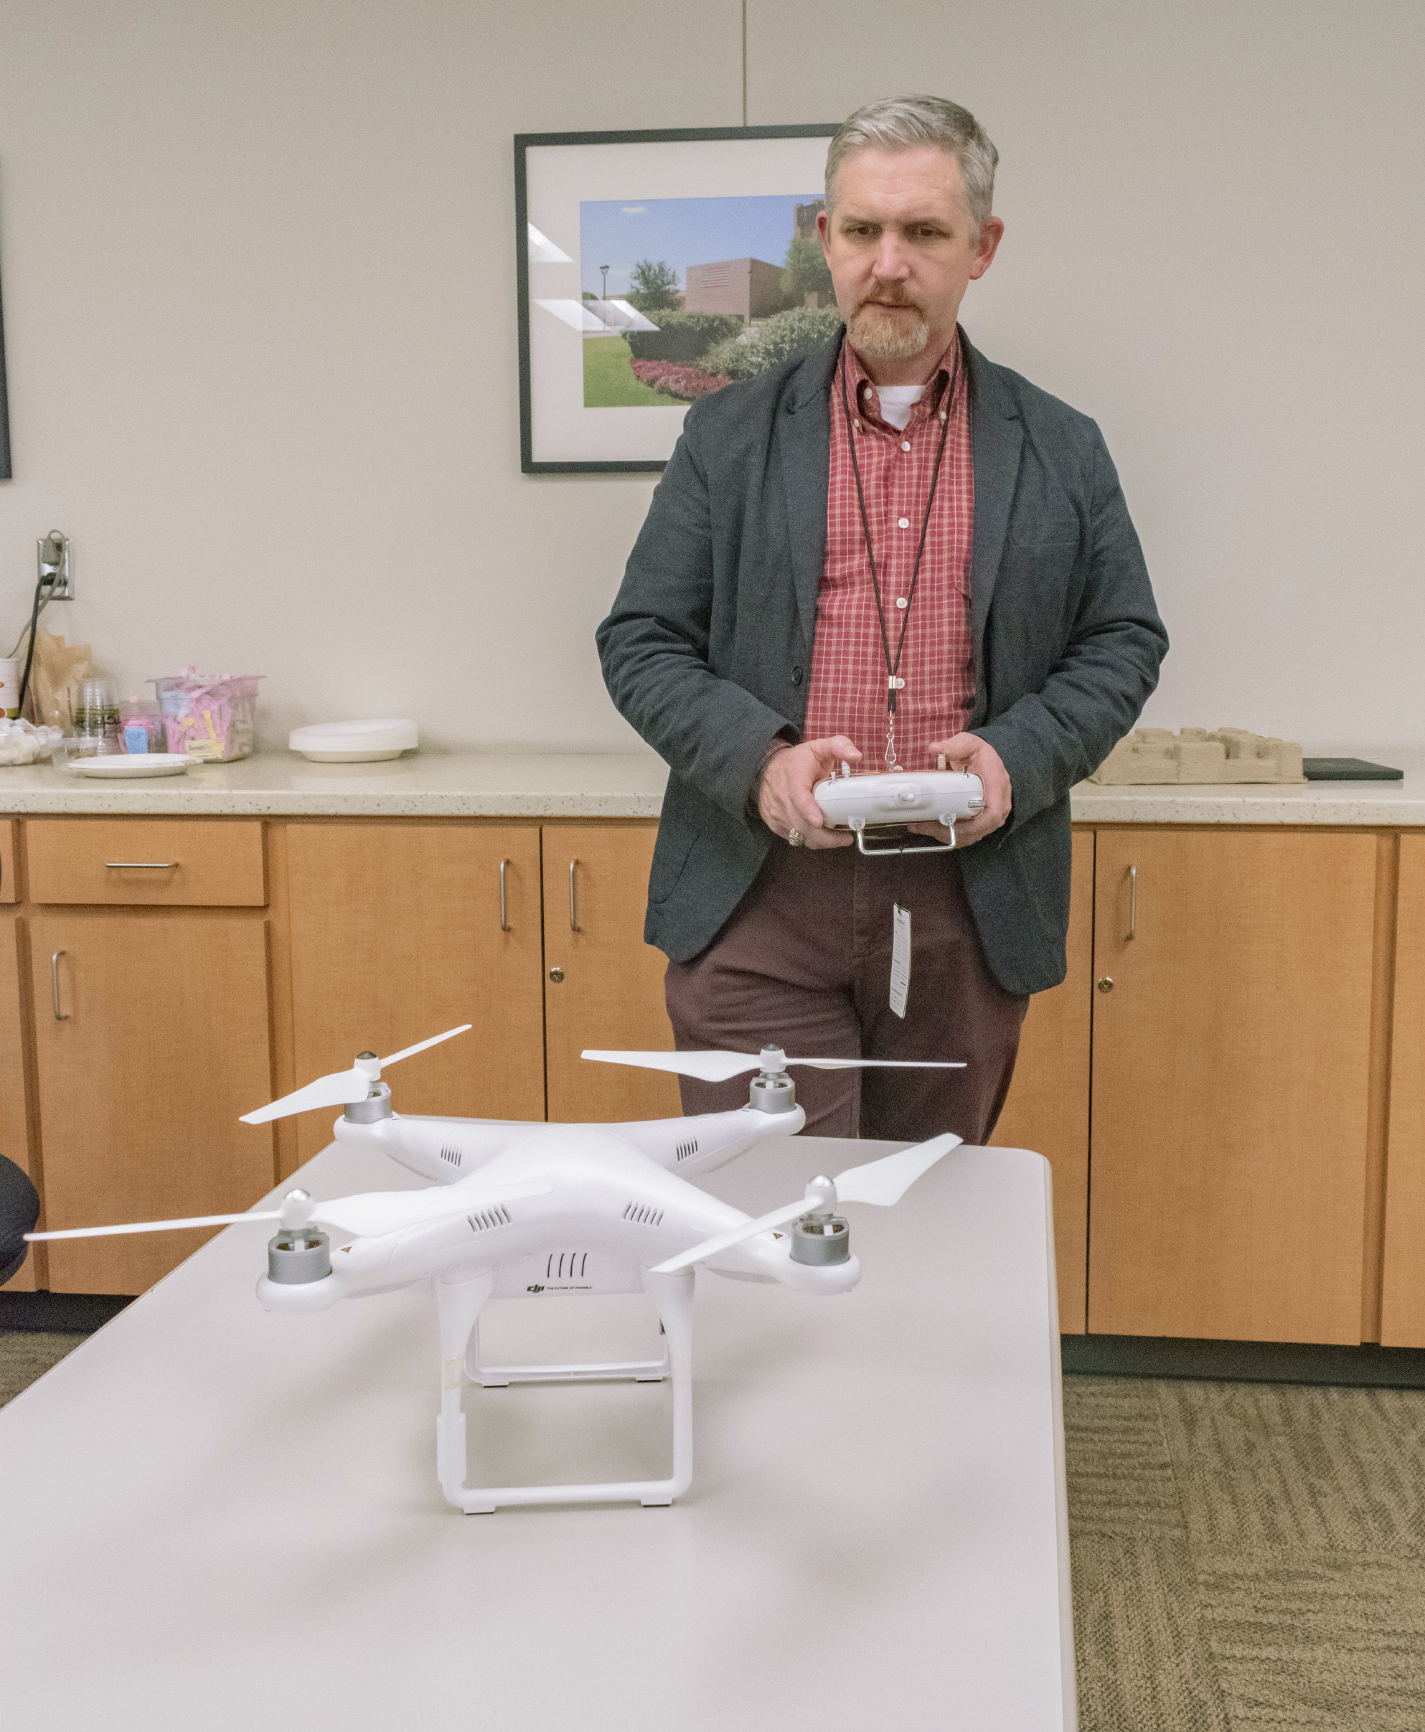 NE special projects coordinator Harry Johnson demonstrates how to operate the Phantom 2 drone which is a part of the remote pilot certification test prep course, where students can learn about regulations for drone flying on the NE and NW Campuses.